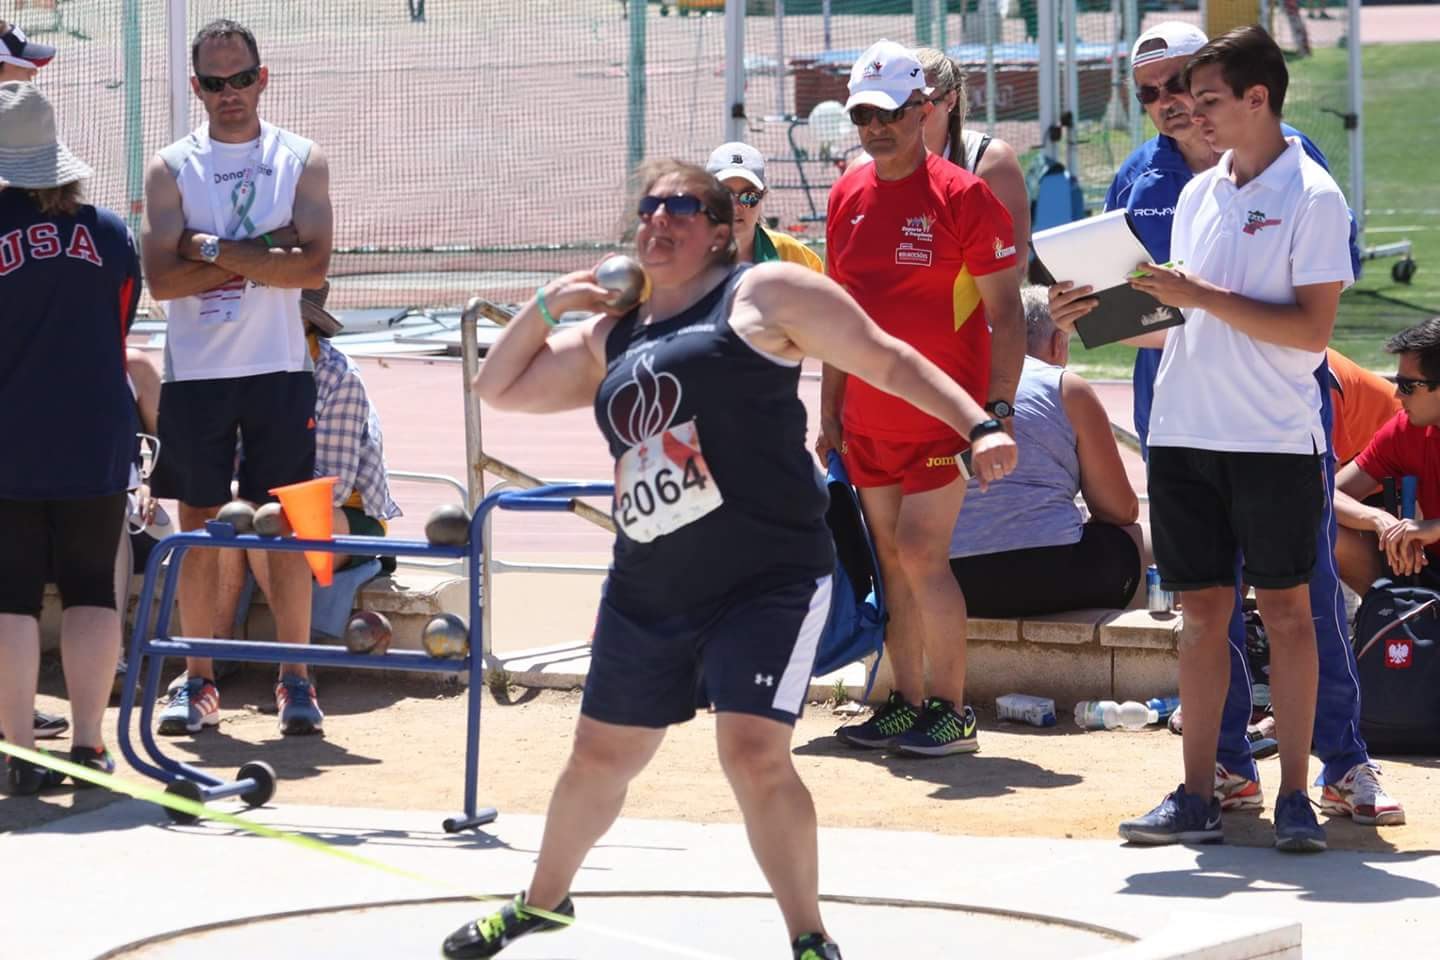 Barb Sheble competing in shot put during Transplant Games